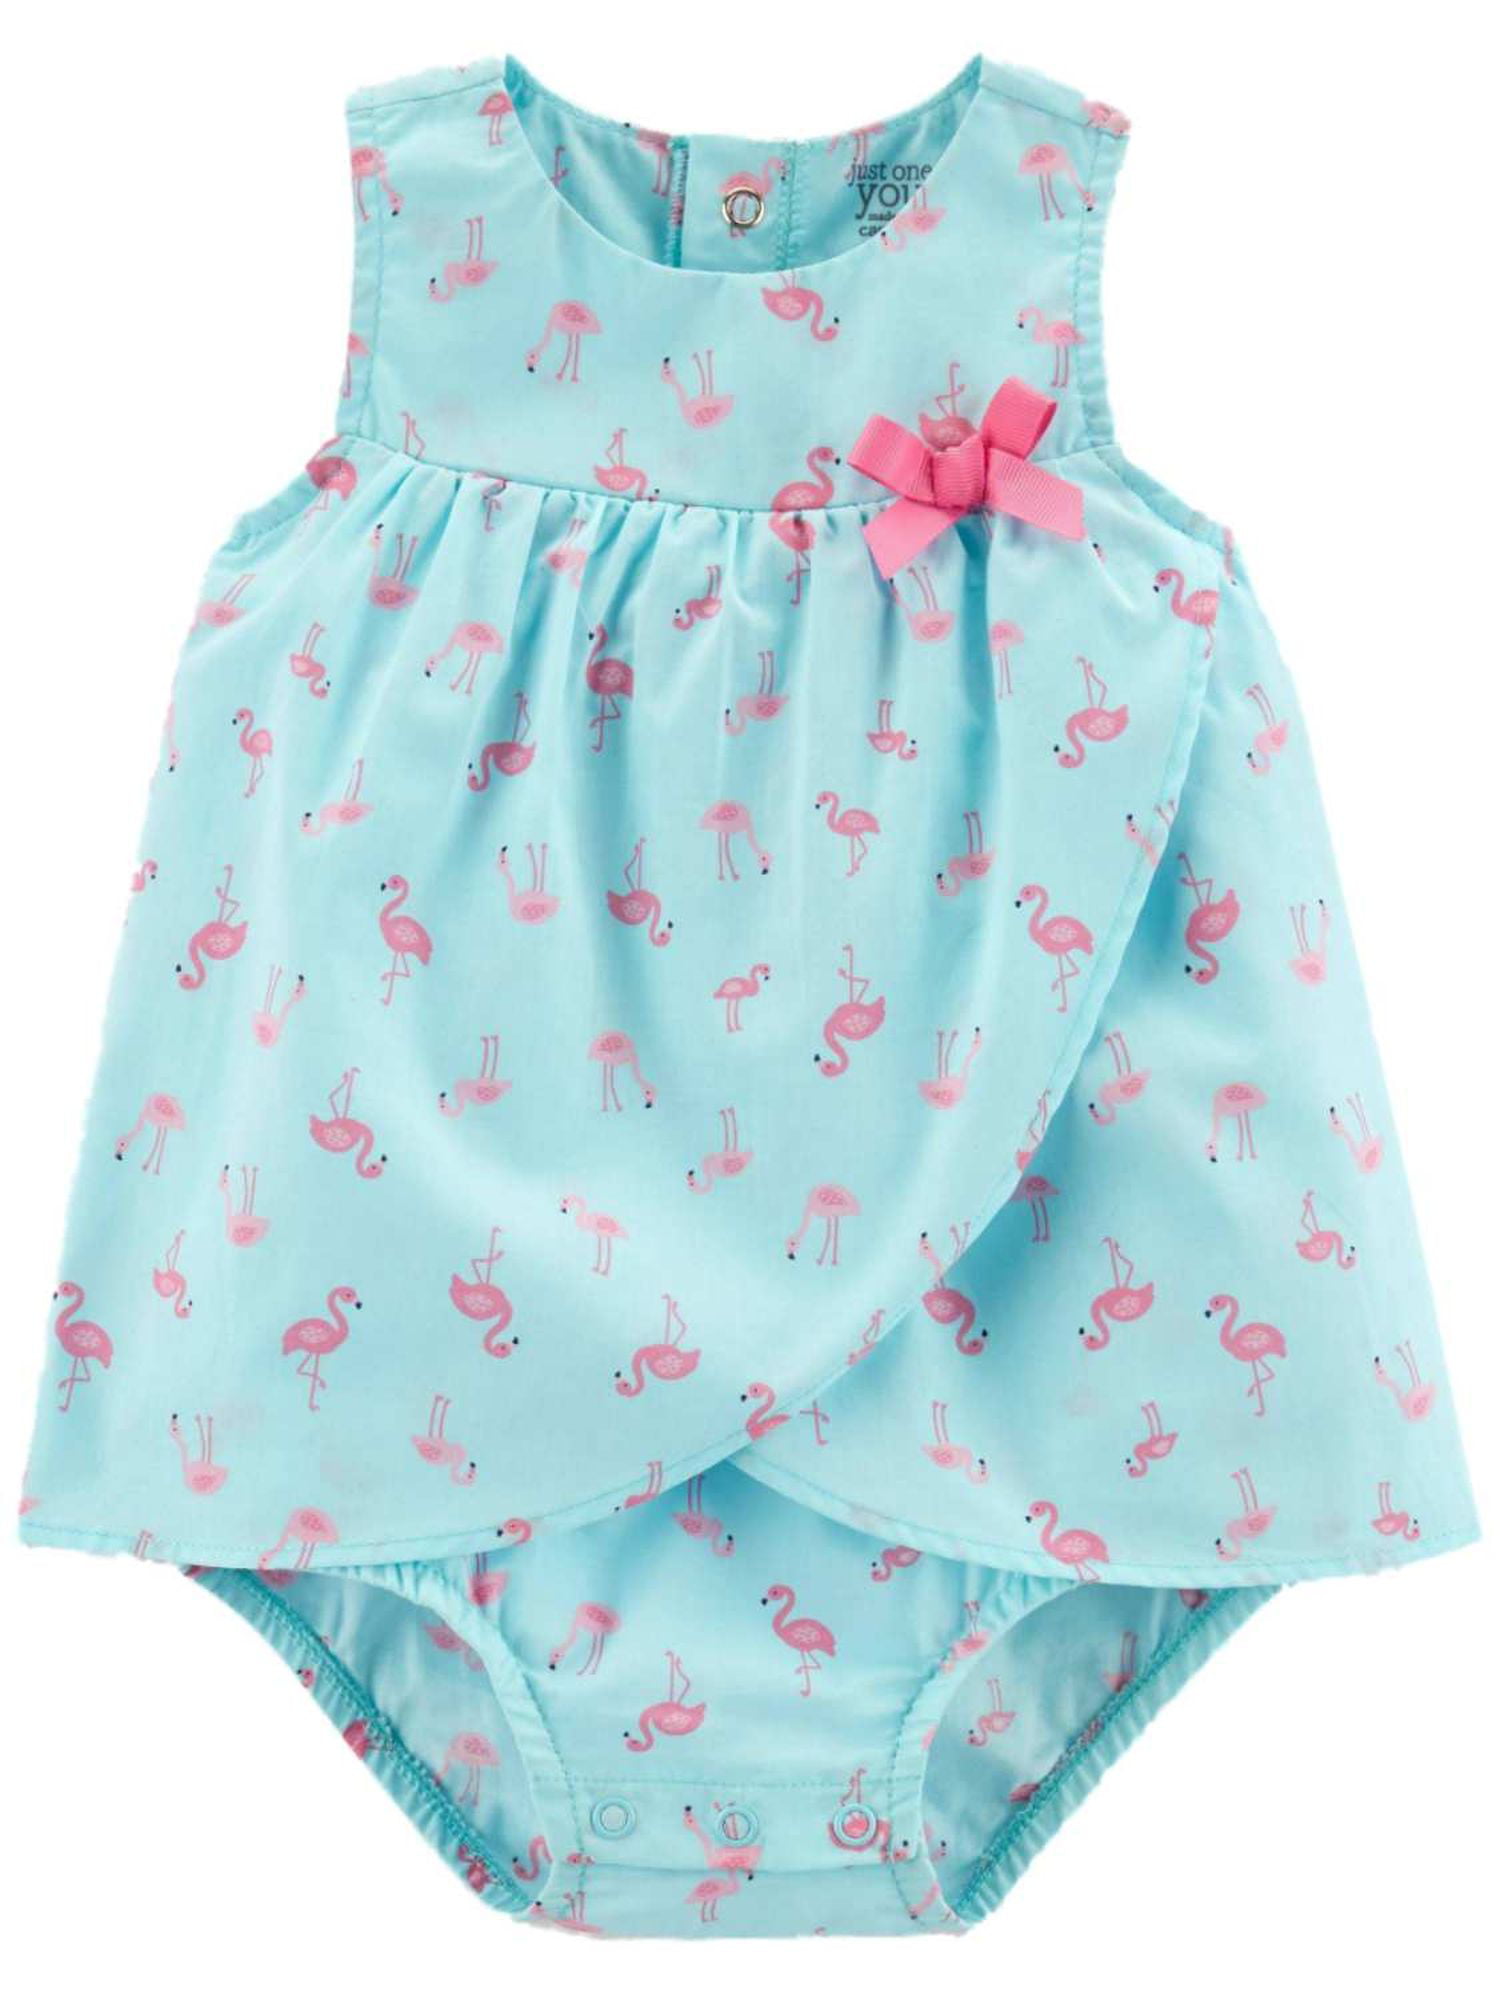 CARTER'S ONE PIECE CREEPER SUNSUIT BABY GIRLS OUTFIT FLORAL NEW WITH TAGS